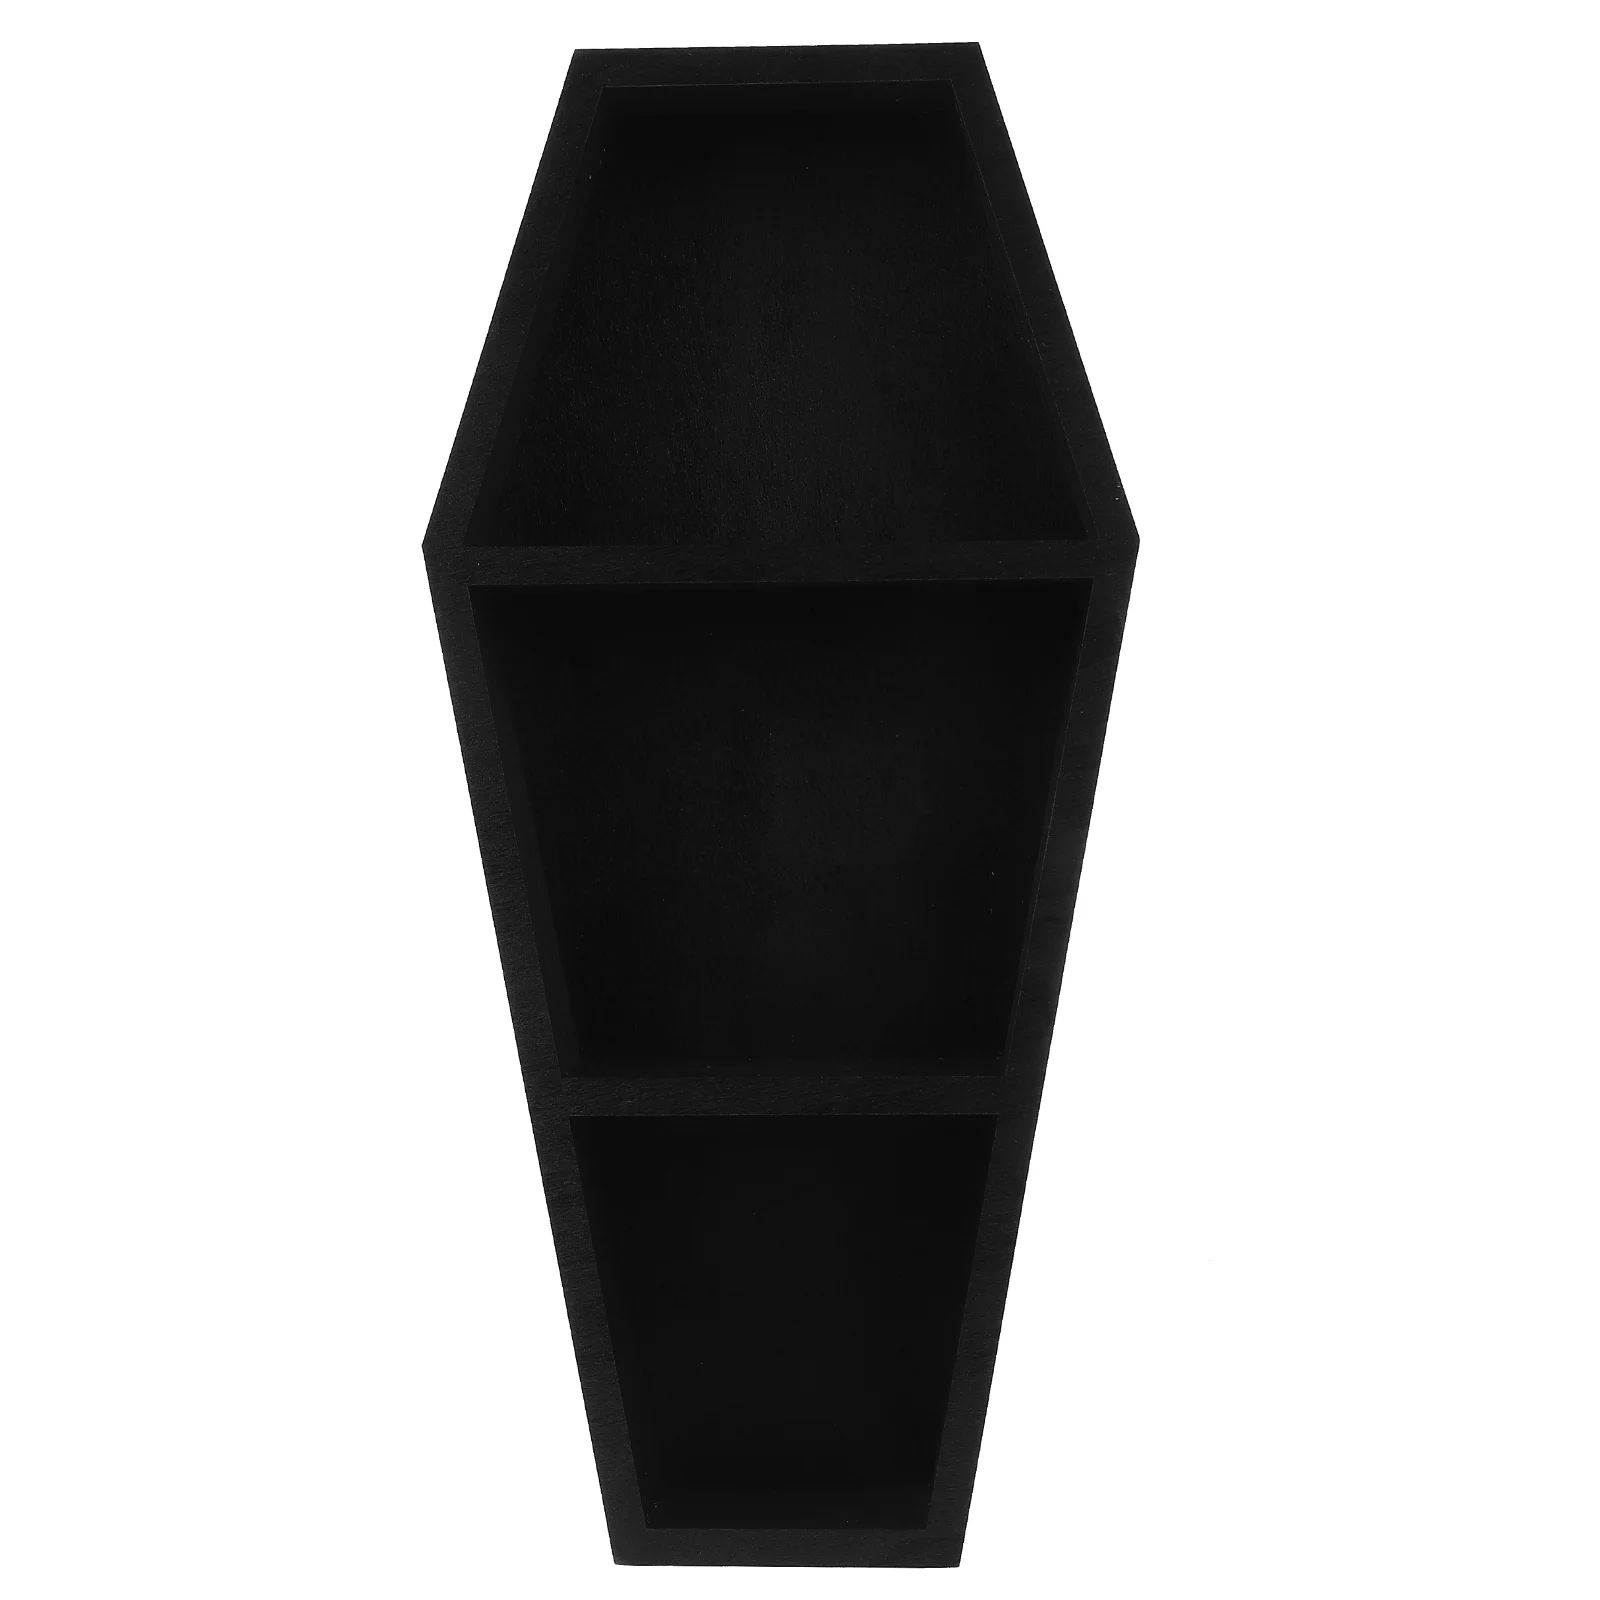 

Coffin Decorations Wall Floating Shelf Display Stand Bookcase Decorative Bookshelf Show Rack Gothic